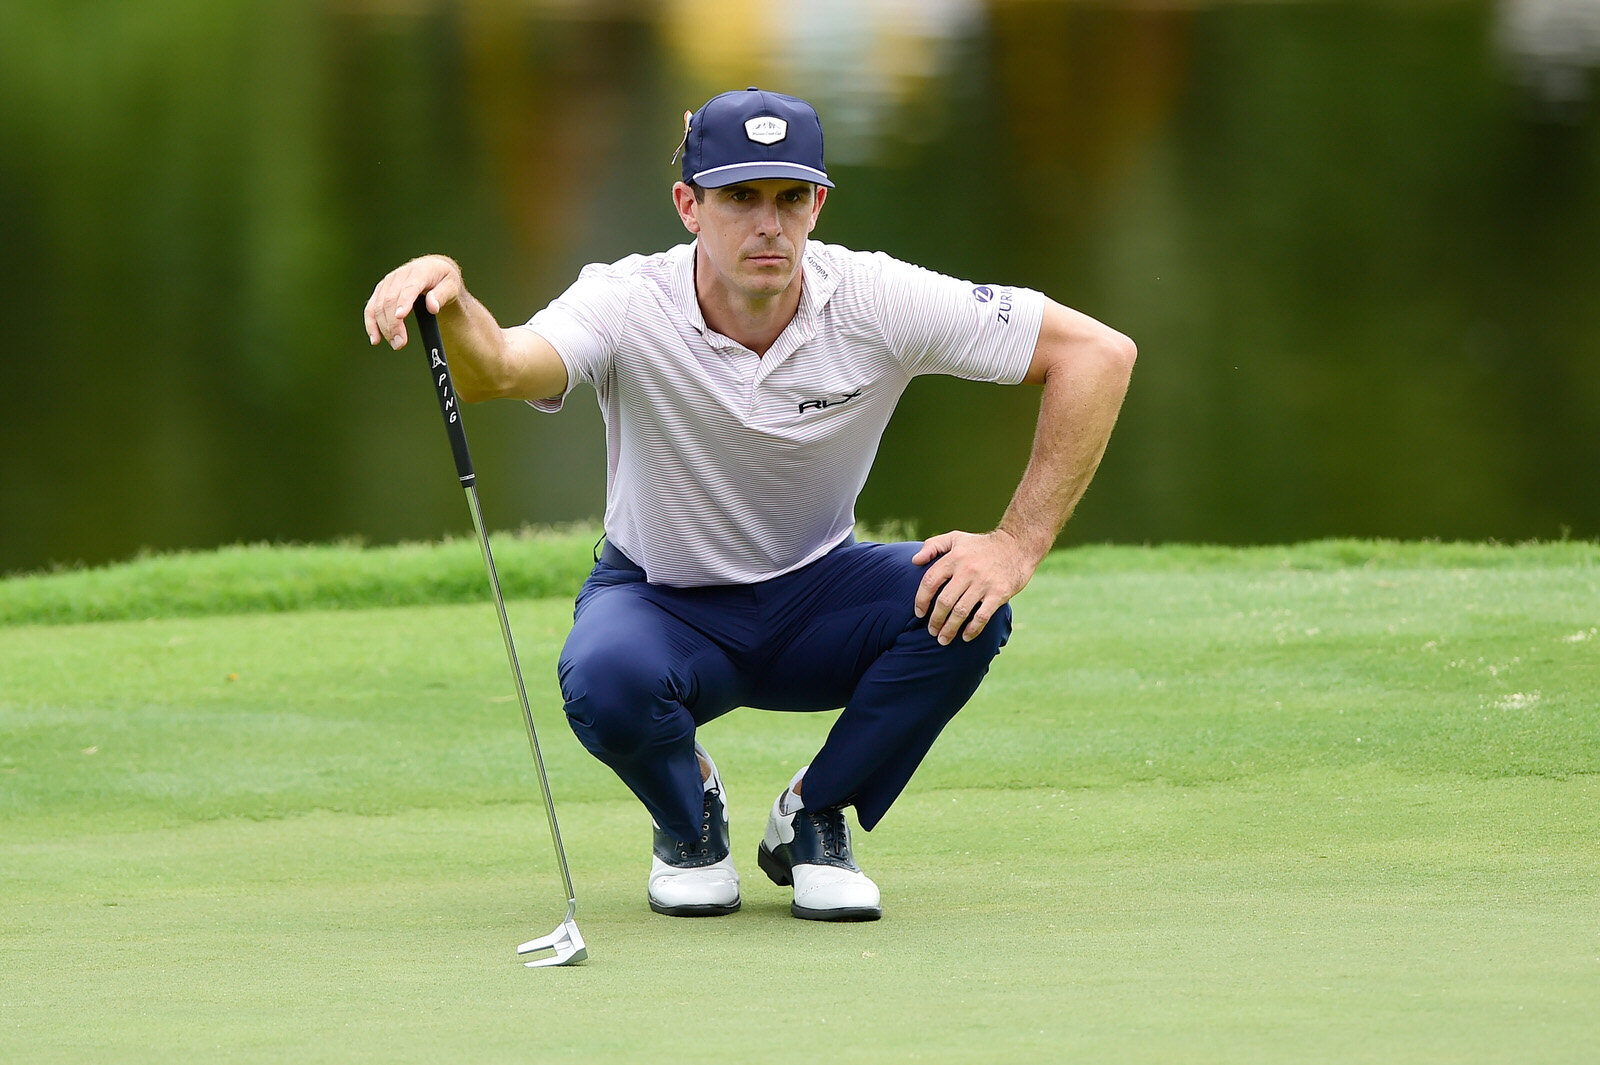  GREENSBORO, NORTH CAROLINA - AUGUST 14: Billy Horschel of the United States lines up a putt on the 15th green during the second round of the Wyndham Championship at  Sedgefield Country Club on August 14, 2020 in Greensboro, North Carolina. (Photo by